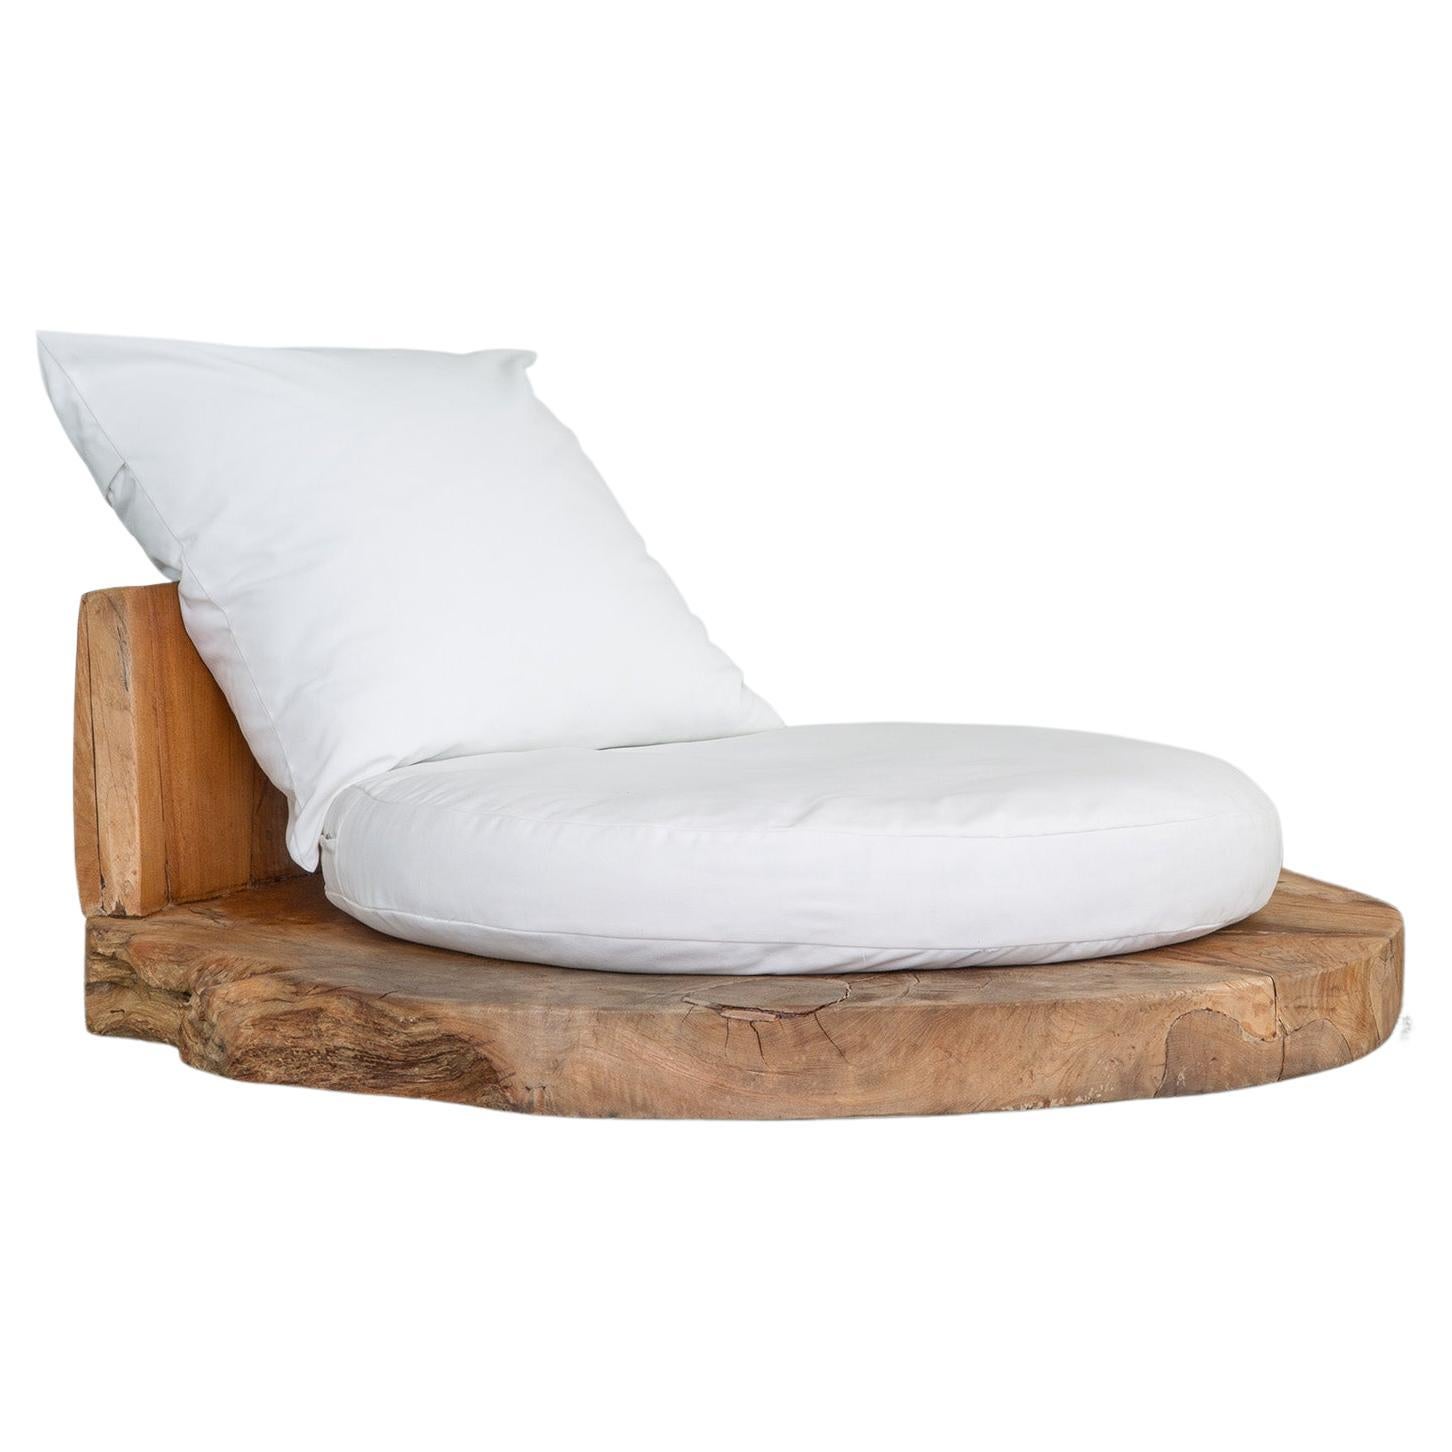 Round Organic Wood Lounge Chair by CEU Studio, Represented by Tuleste Factory